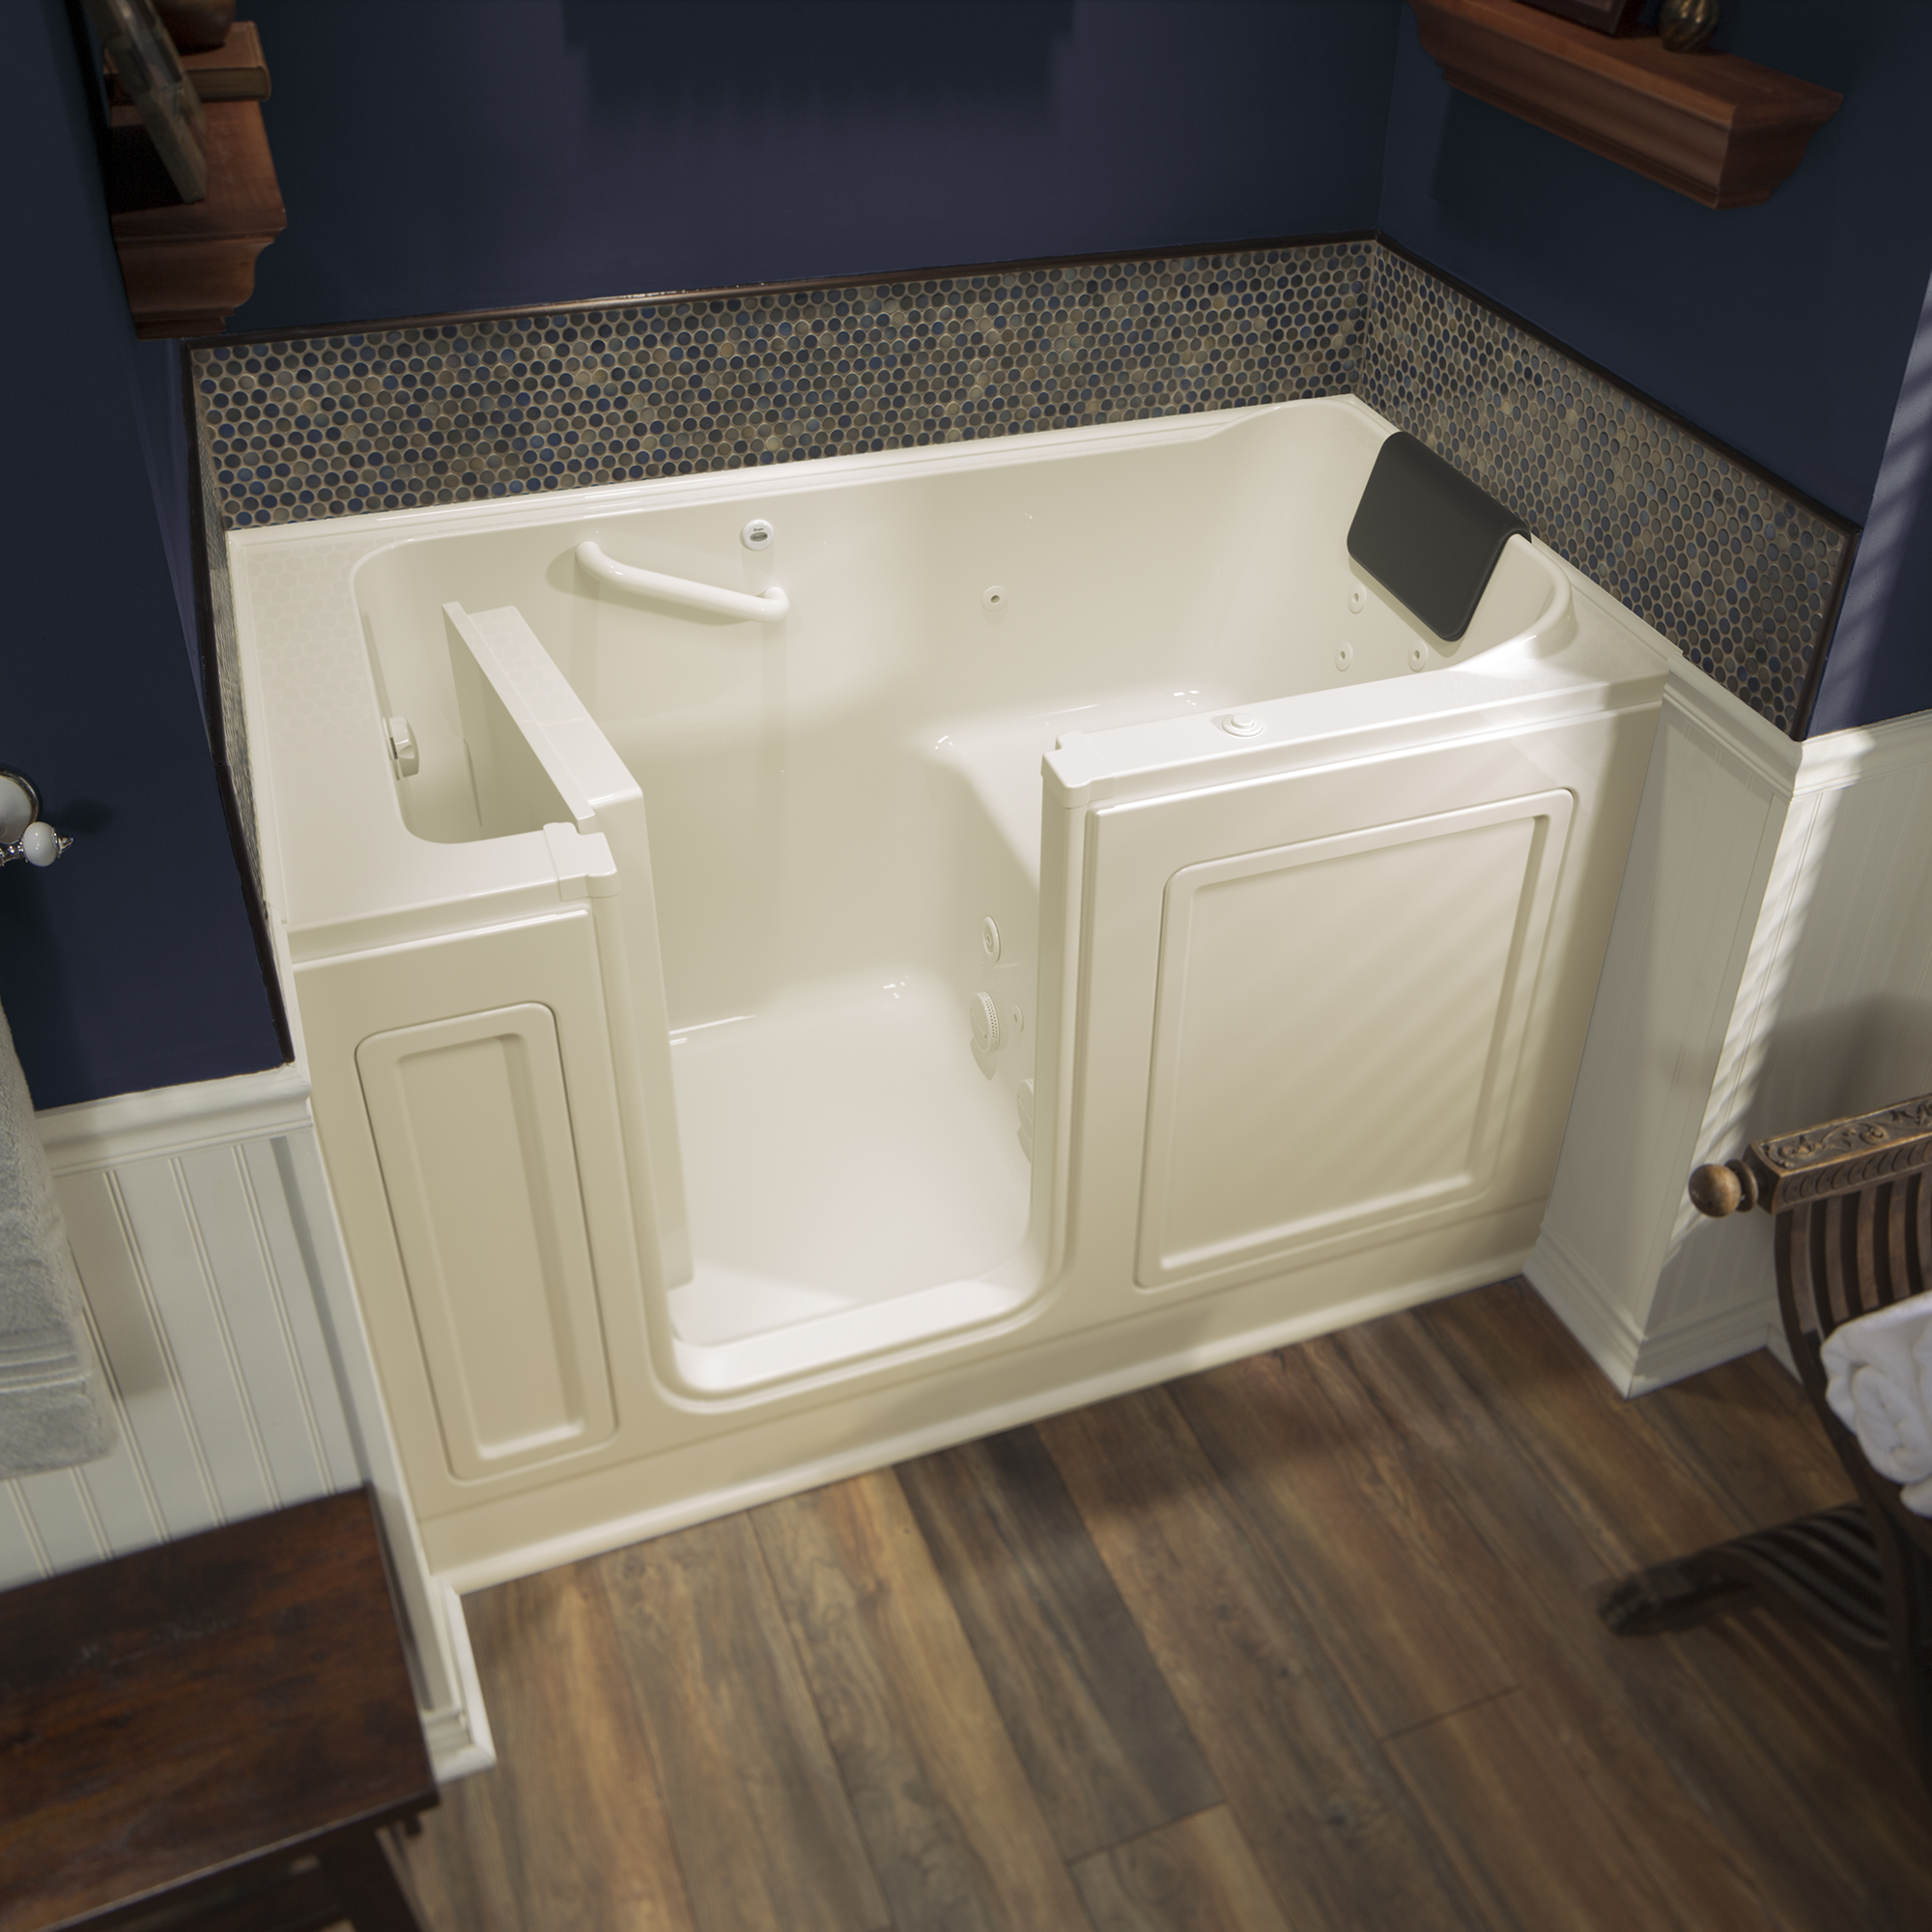 Acrylic Luxury Series 32 x 60 -Inch Walk-in Tub With Whirlpool System - Left-Hand Drain